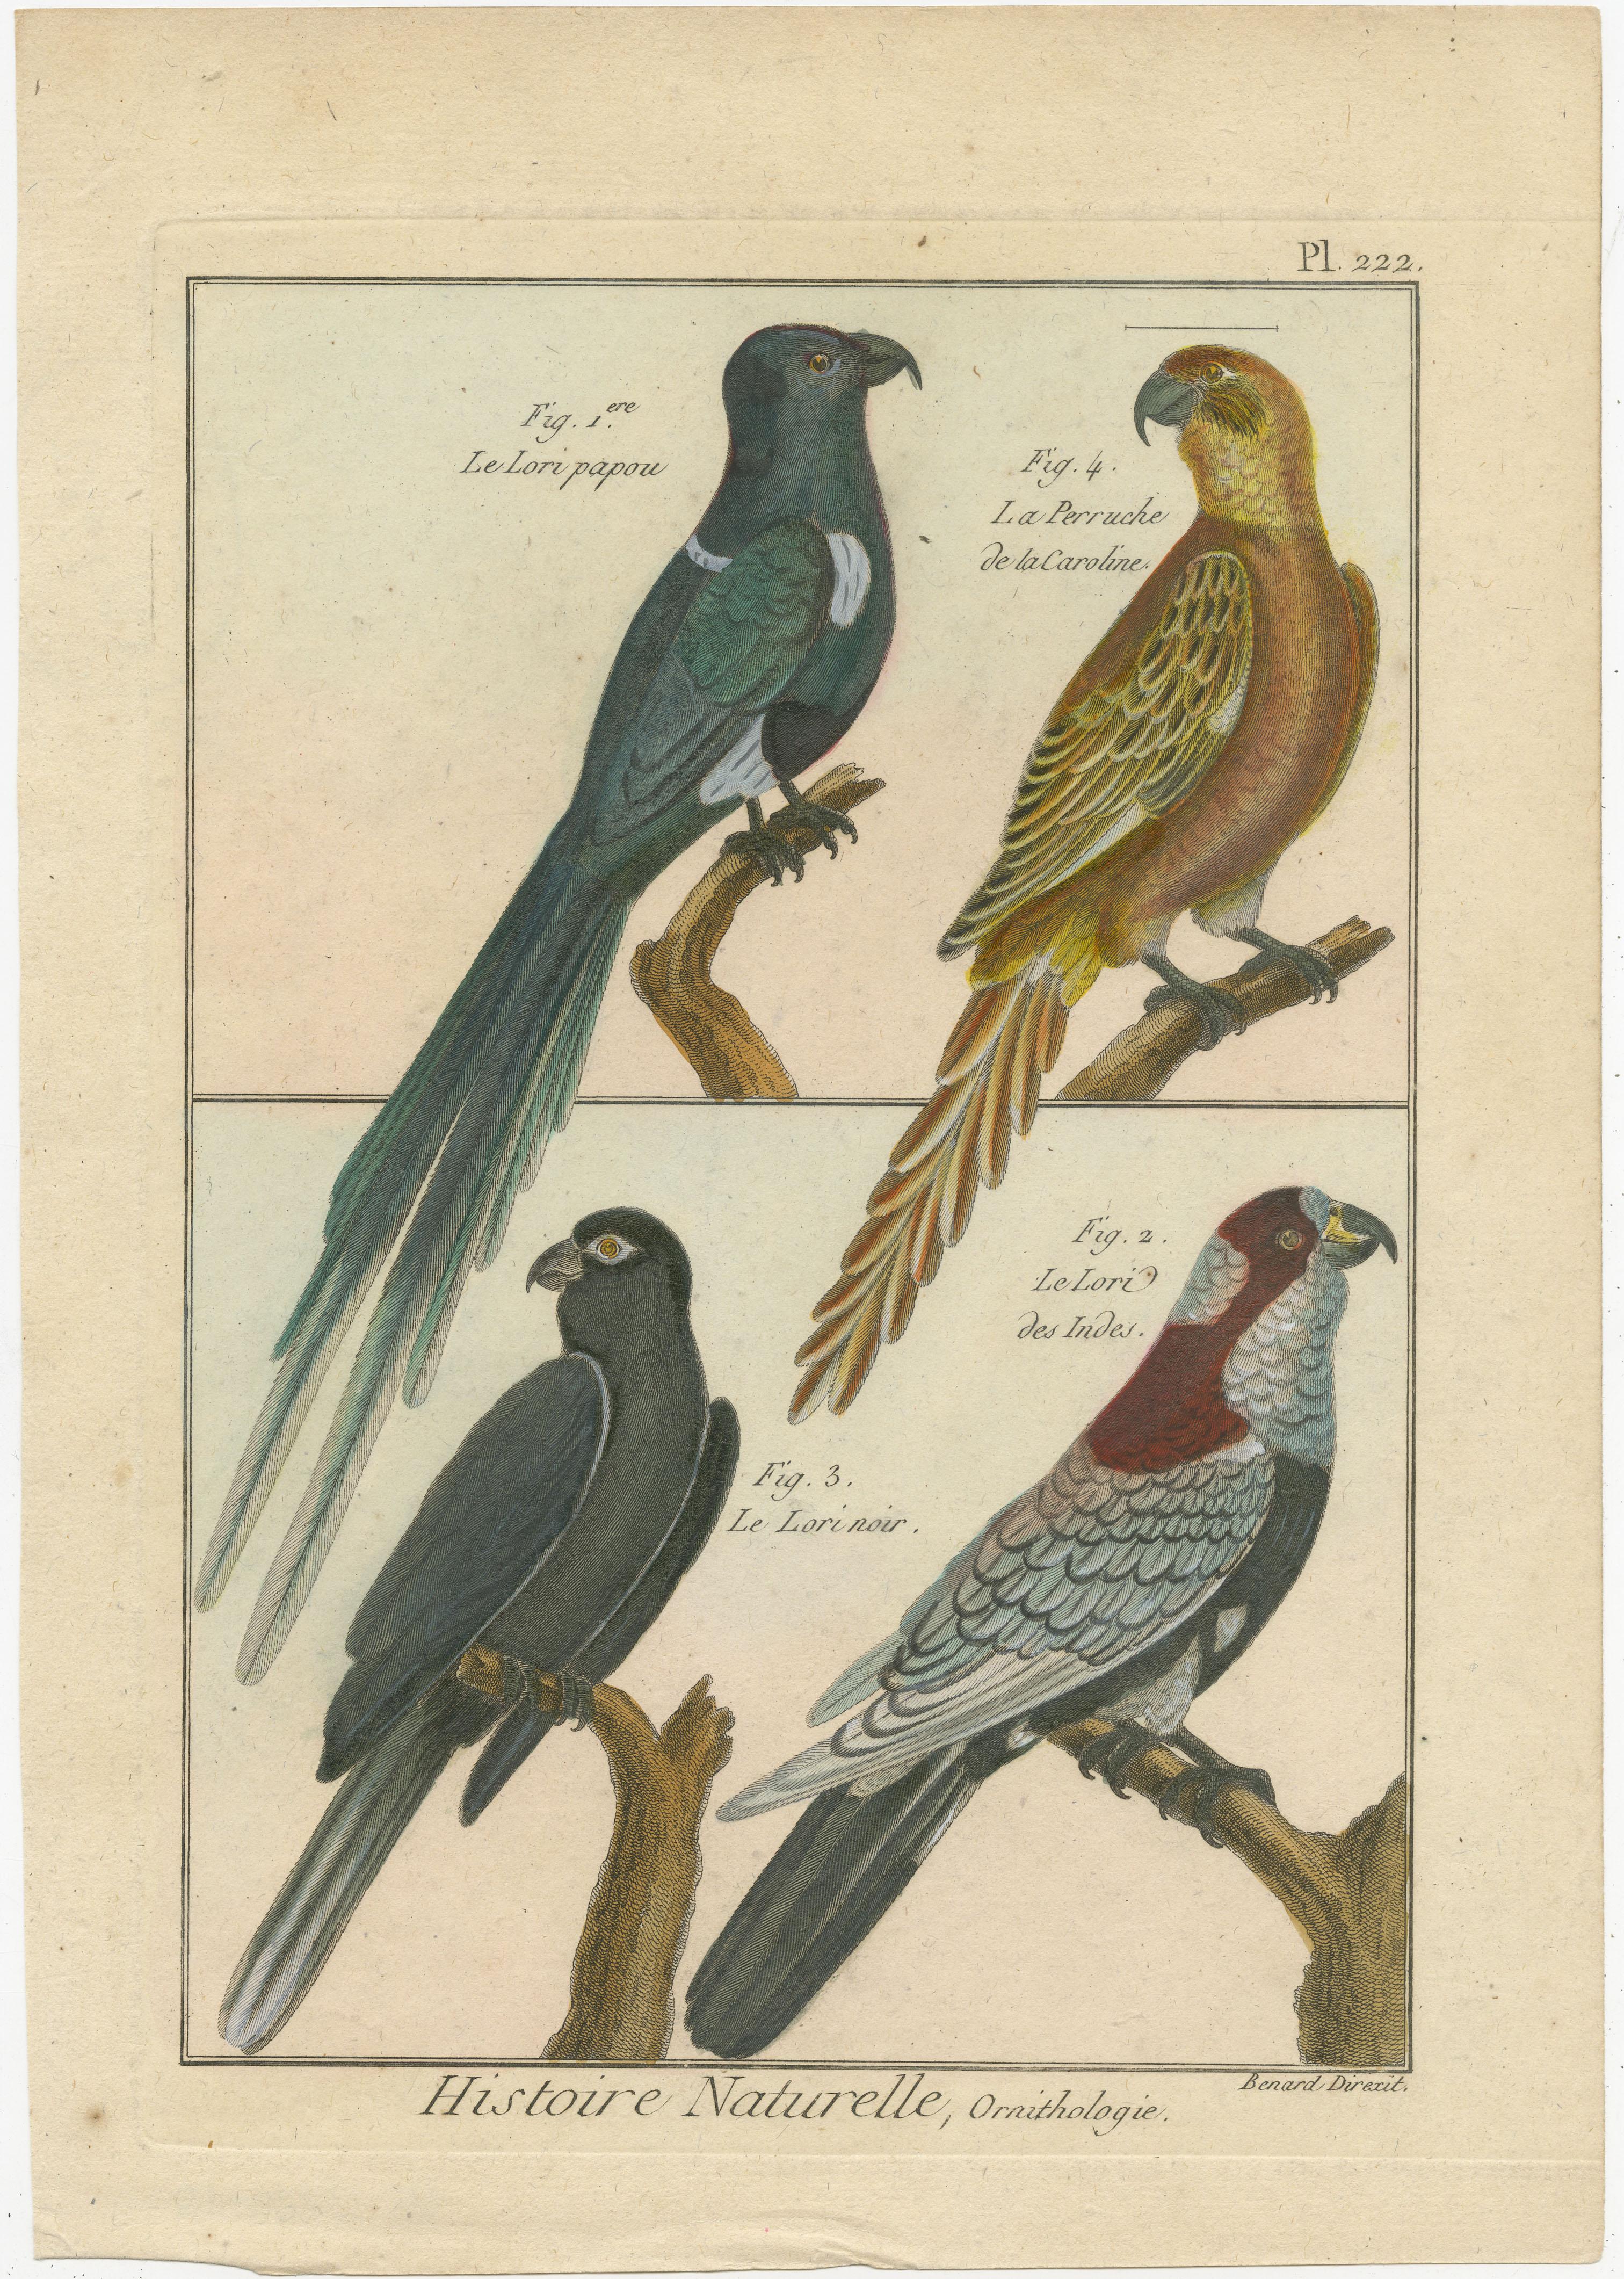 An authentic, perfect and bright, originally hand-colored, illustration of four Parrots, on parchment paper (copper engraving). It has a fine shining because of the authenticly applied egg-yolk as varnish. The Artist is Robert Bernard (1792). The